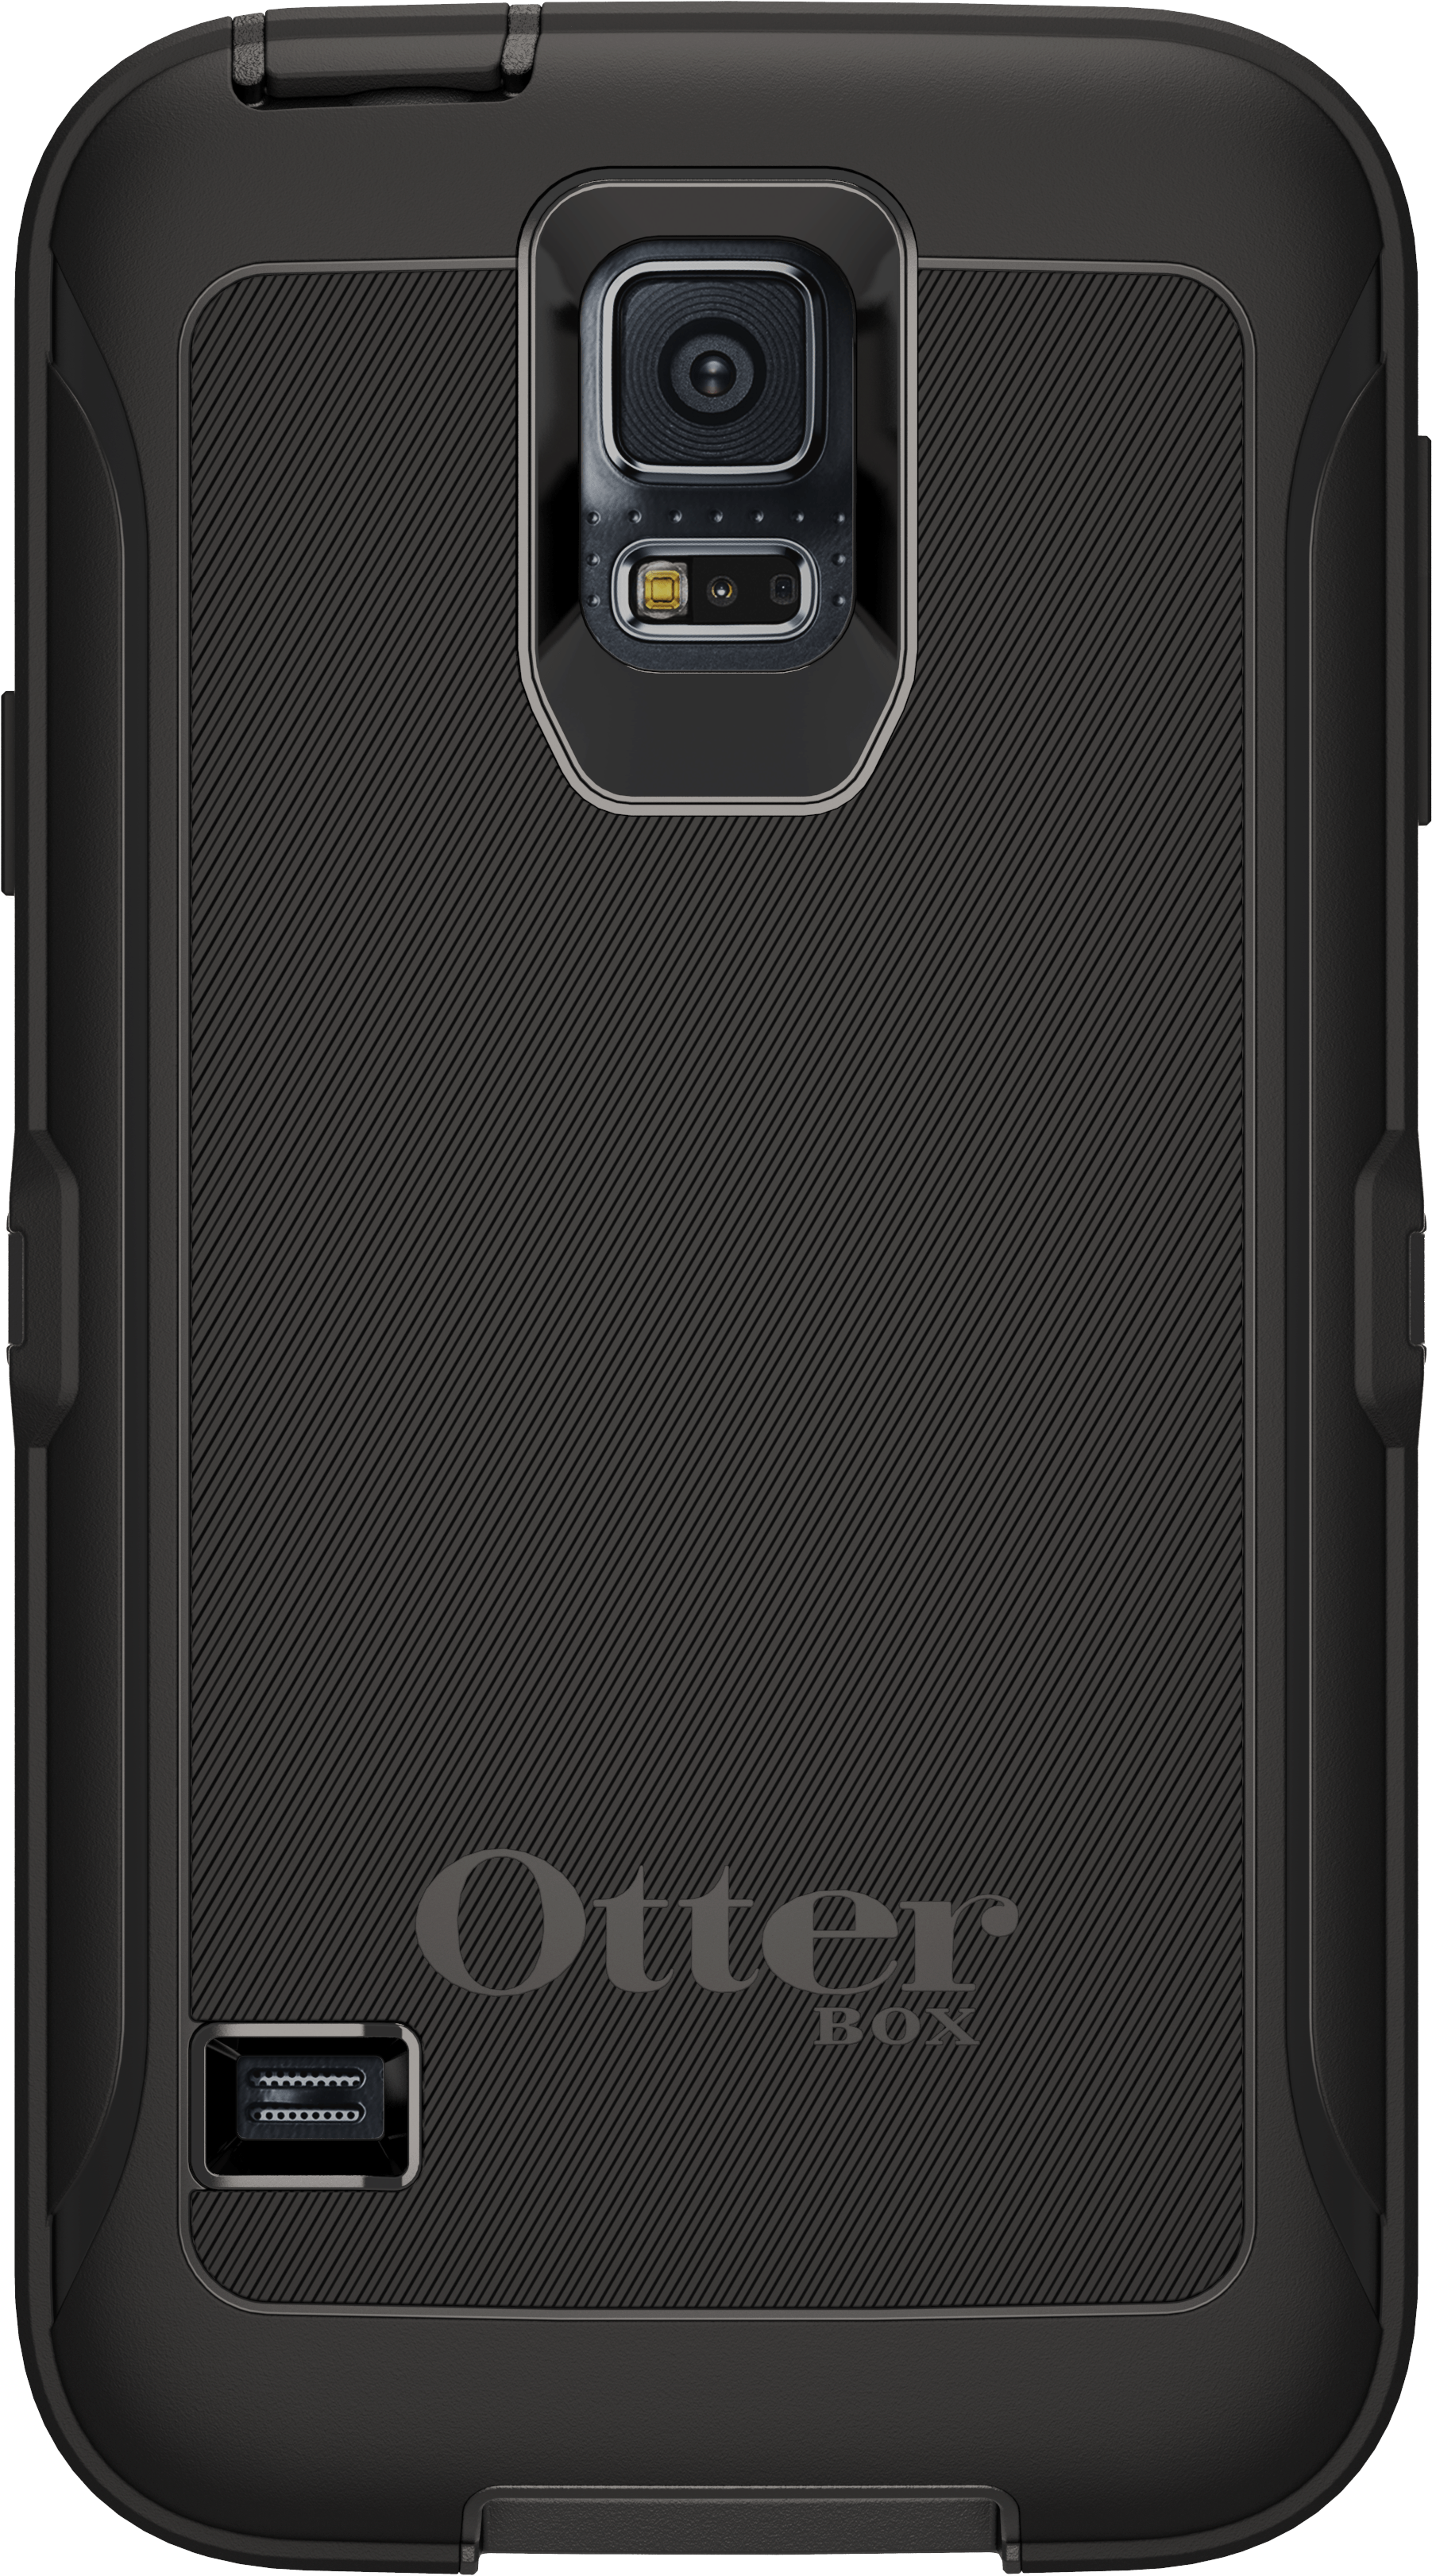 OtterBox Defender Series Case for Samsung Galaxy S5, Black - image 1 of 26